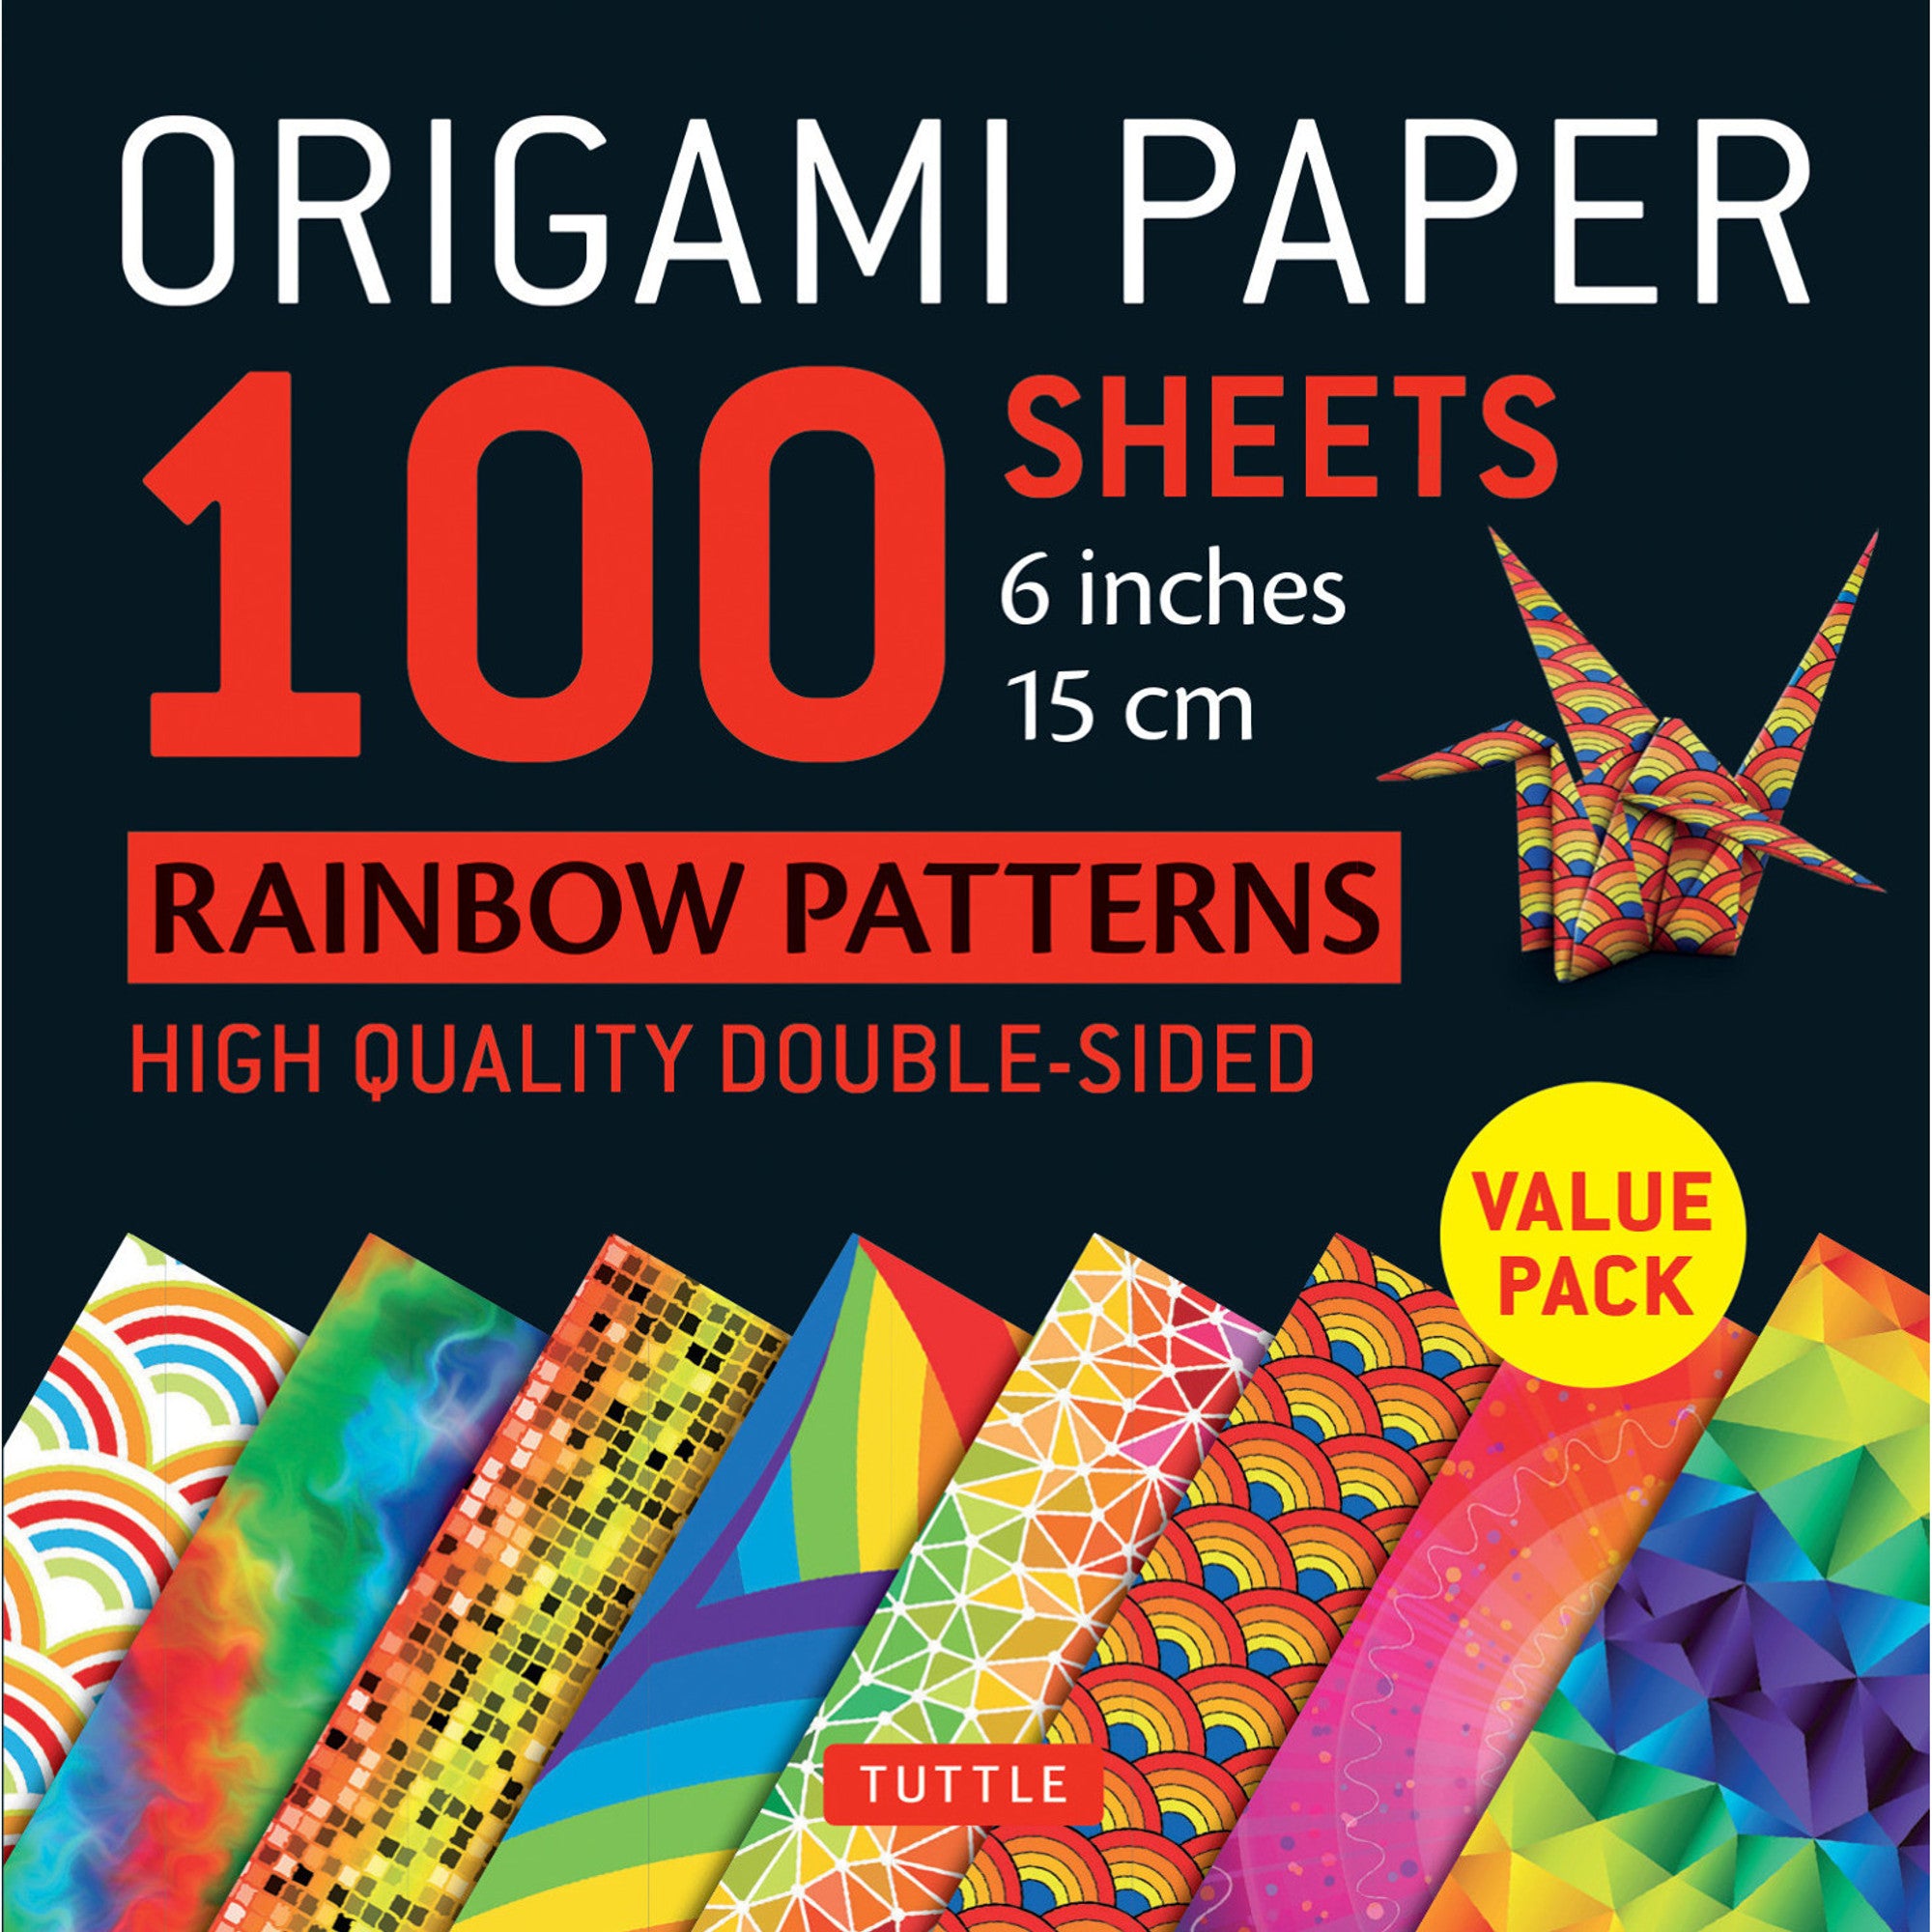 100 Sheets Rainbow Patterns Origami Paper